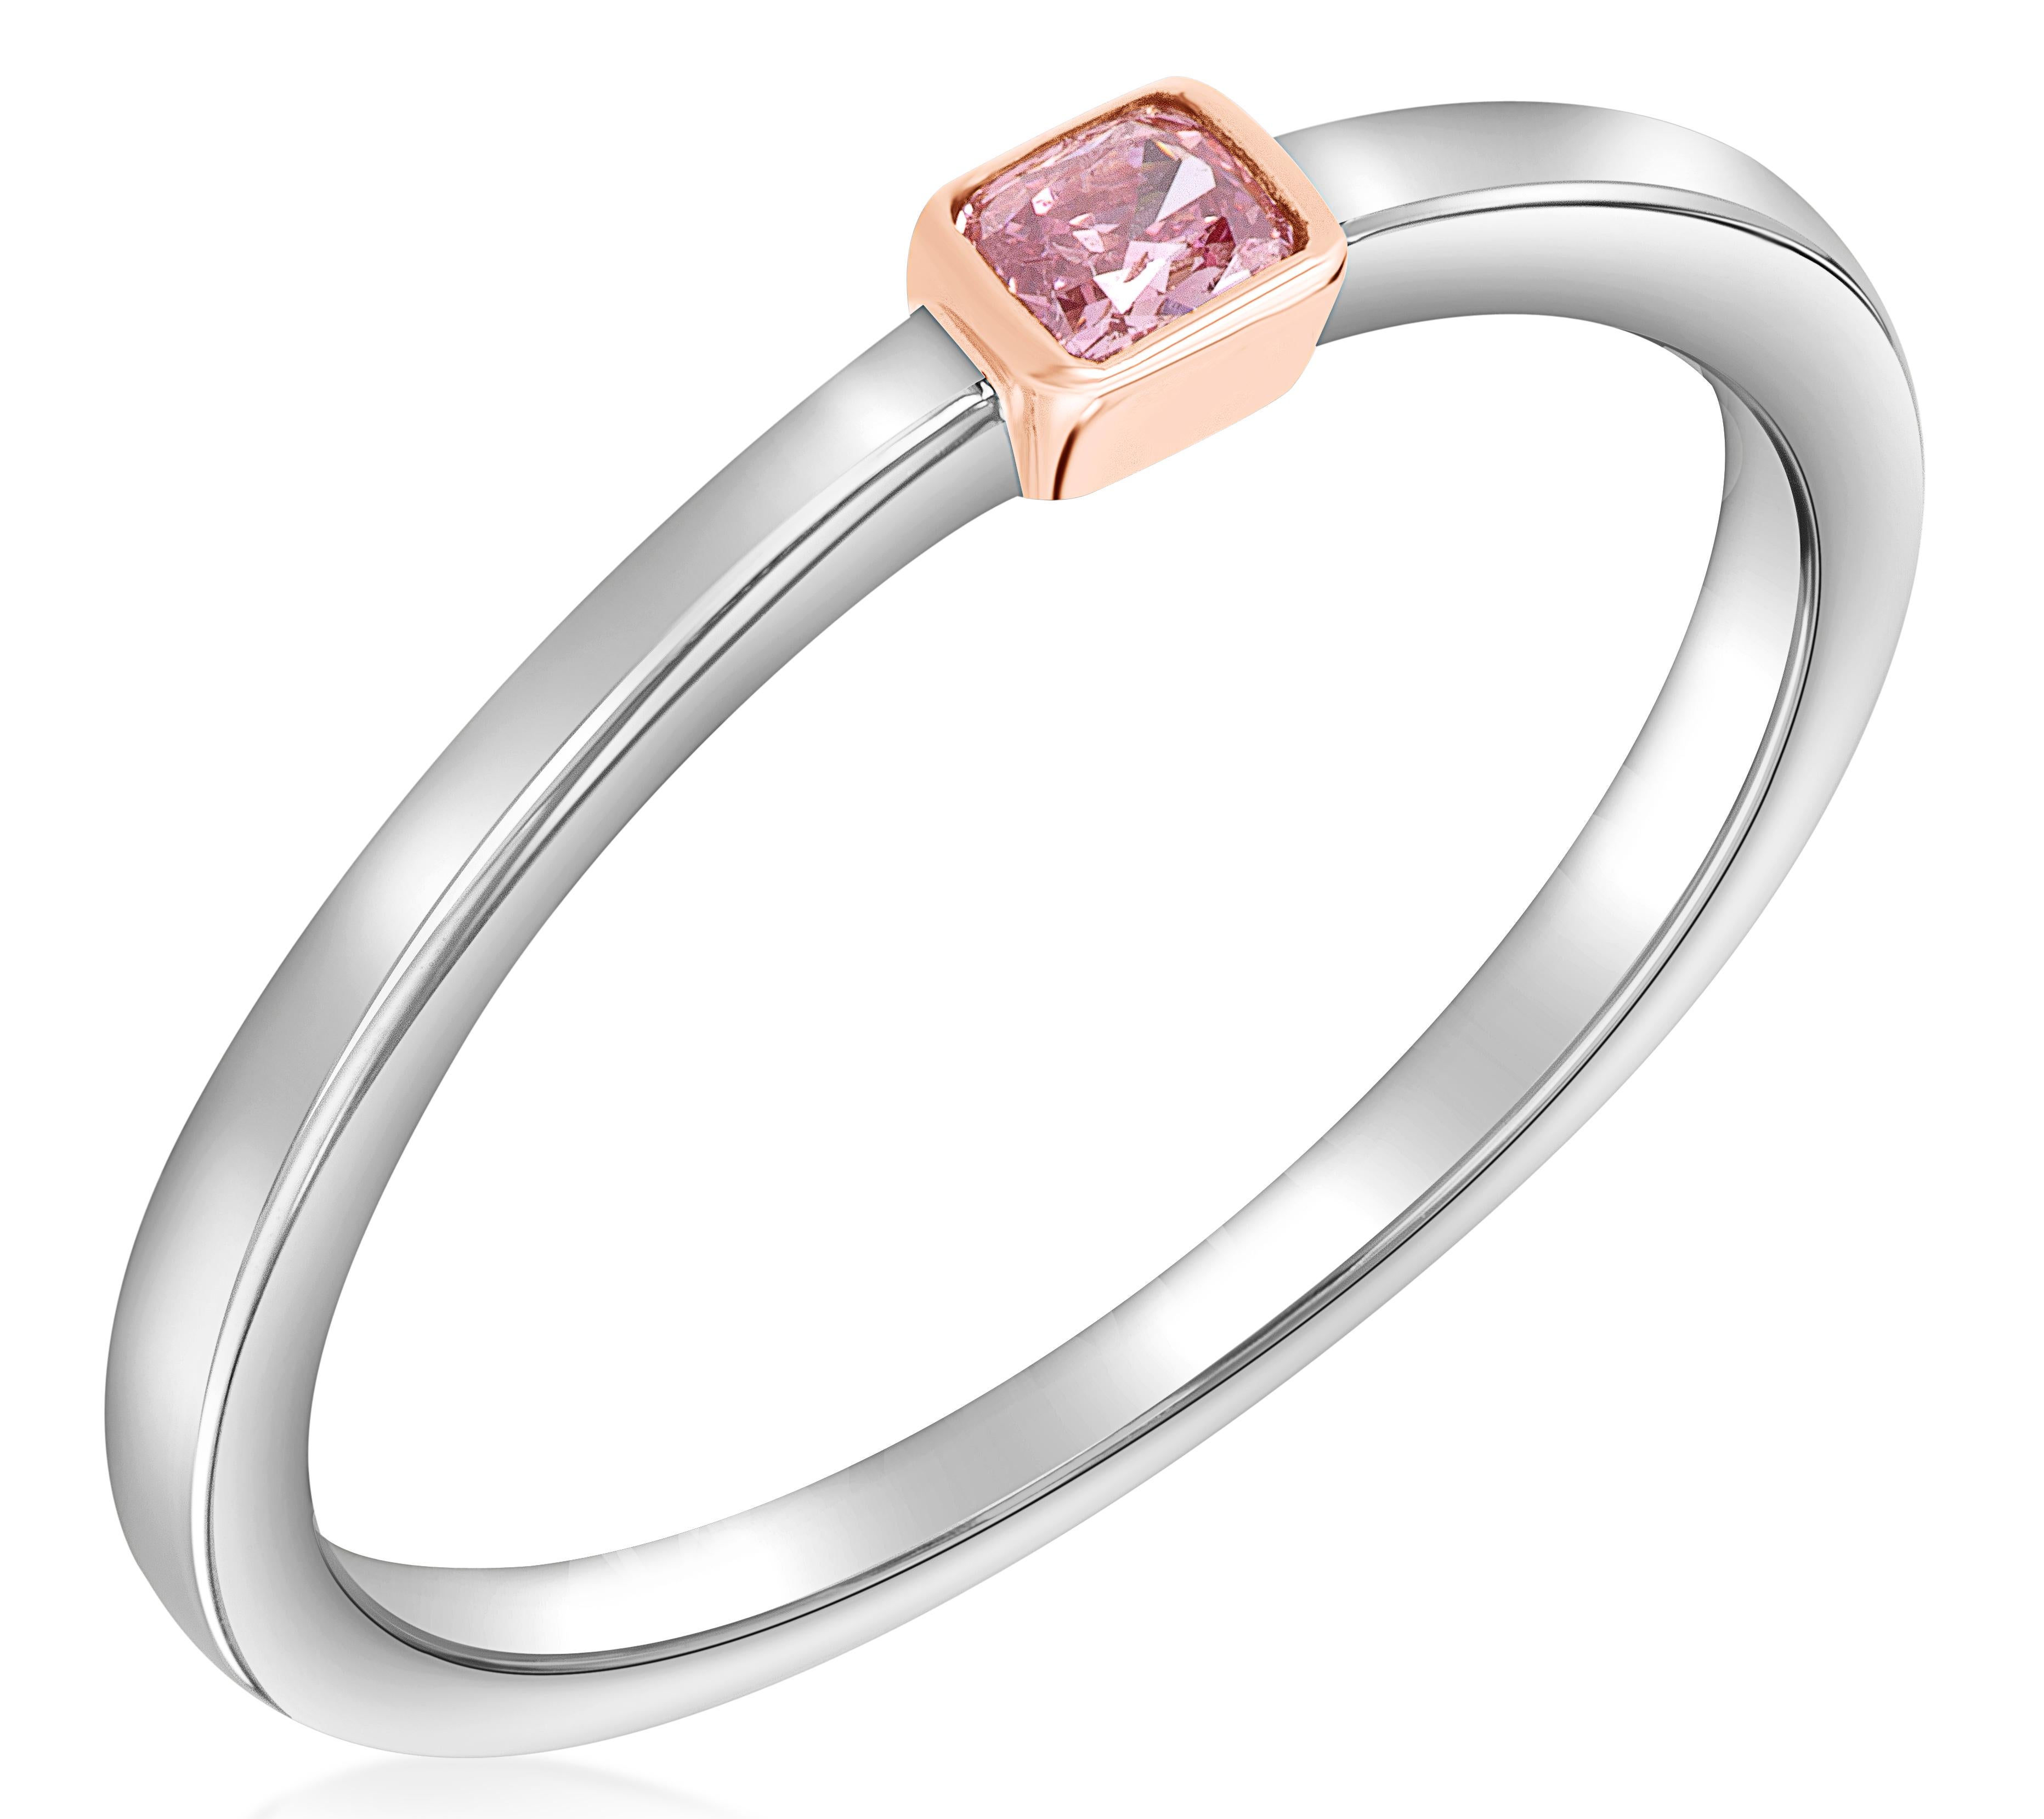 Stackable ring featuring a 0.10 carat fancy intense pink radiant. GIA#:5211437494. Set in 18k rose and white gold.

